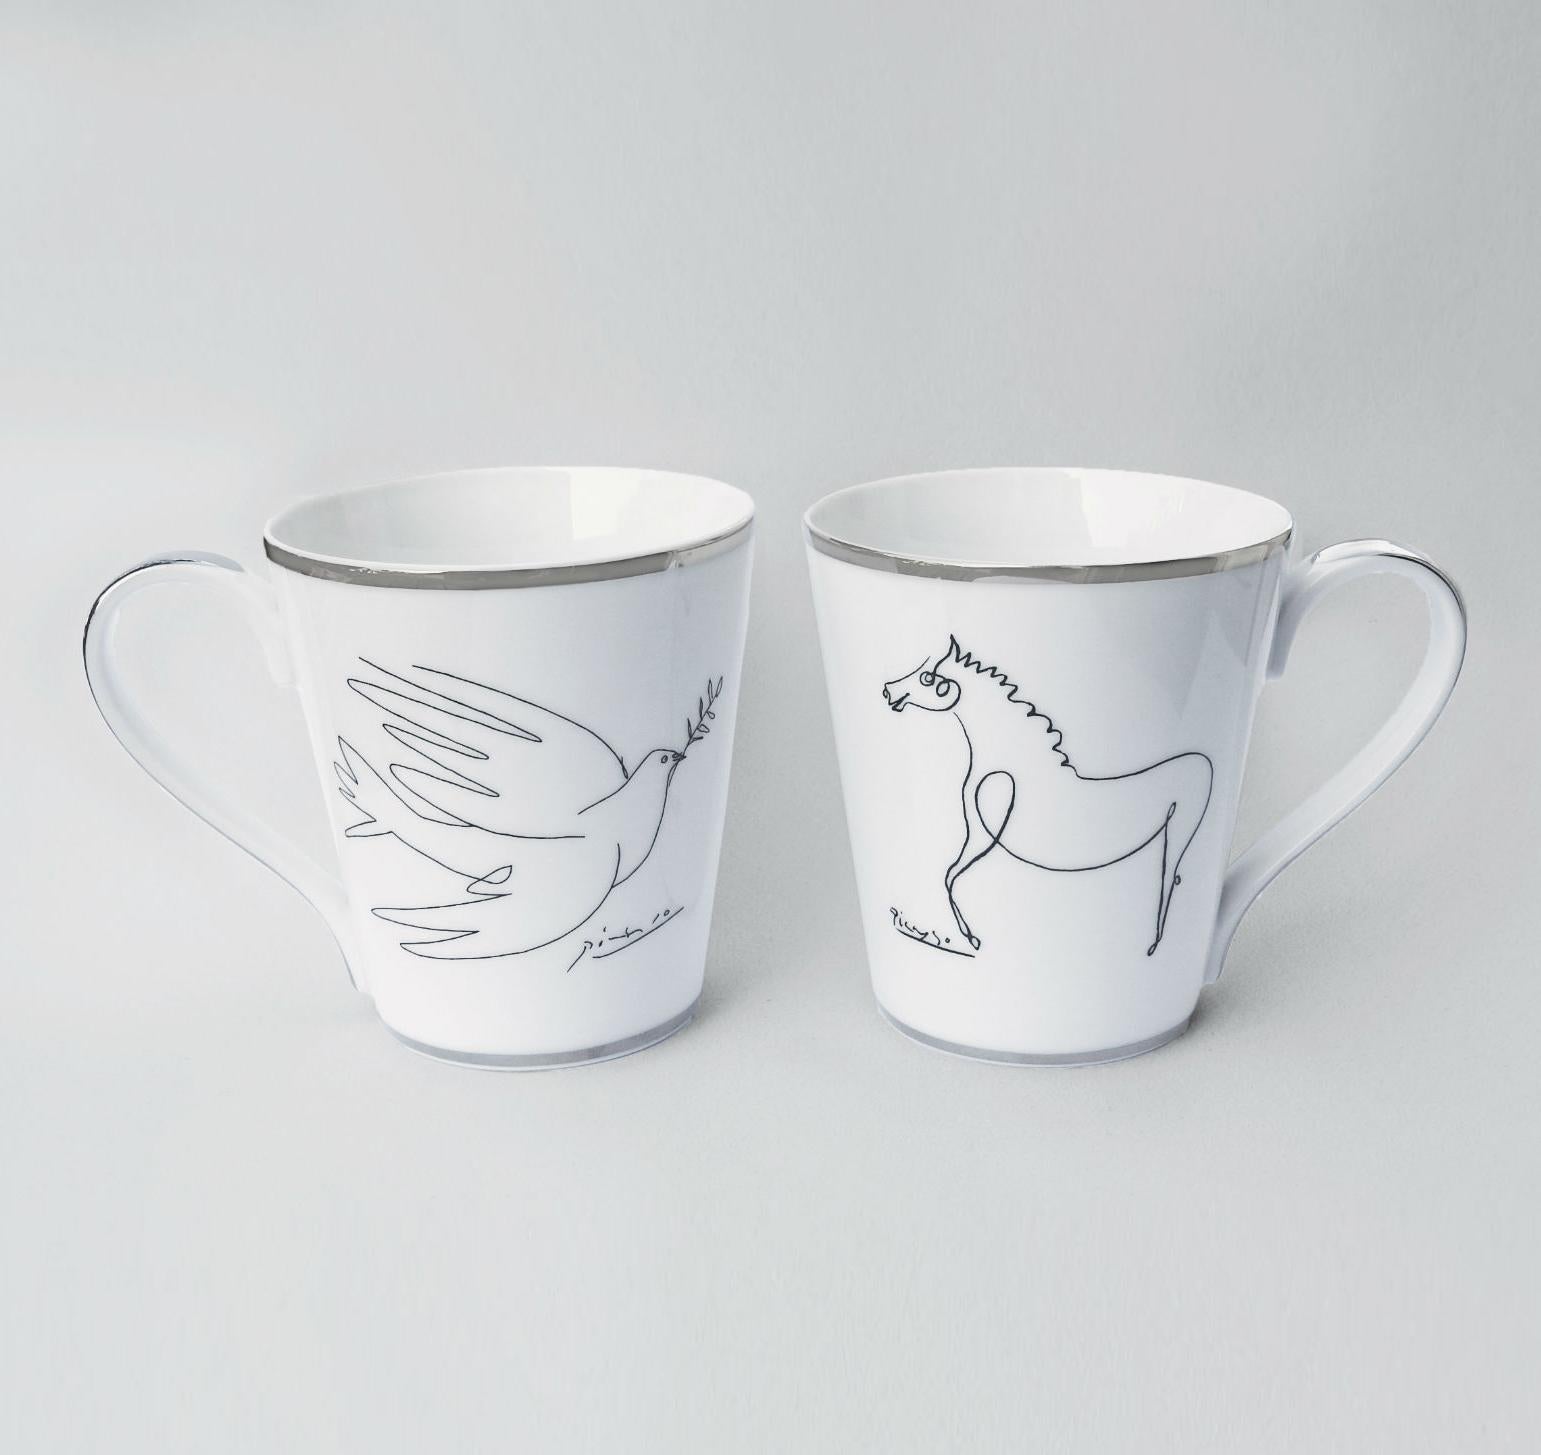 The Dove & The Horse Mug Set
Boxed set of coffee or tea mugs
Porcelain from Limoges with silver trim
Custom gift box

This boxed set of two porcelain coffee or tea mugs were made in collaboration with the artist's estate and feature two of